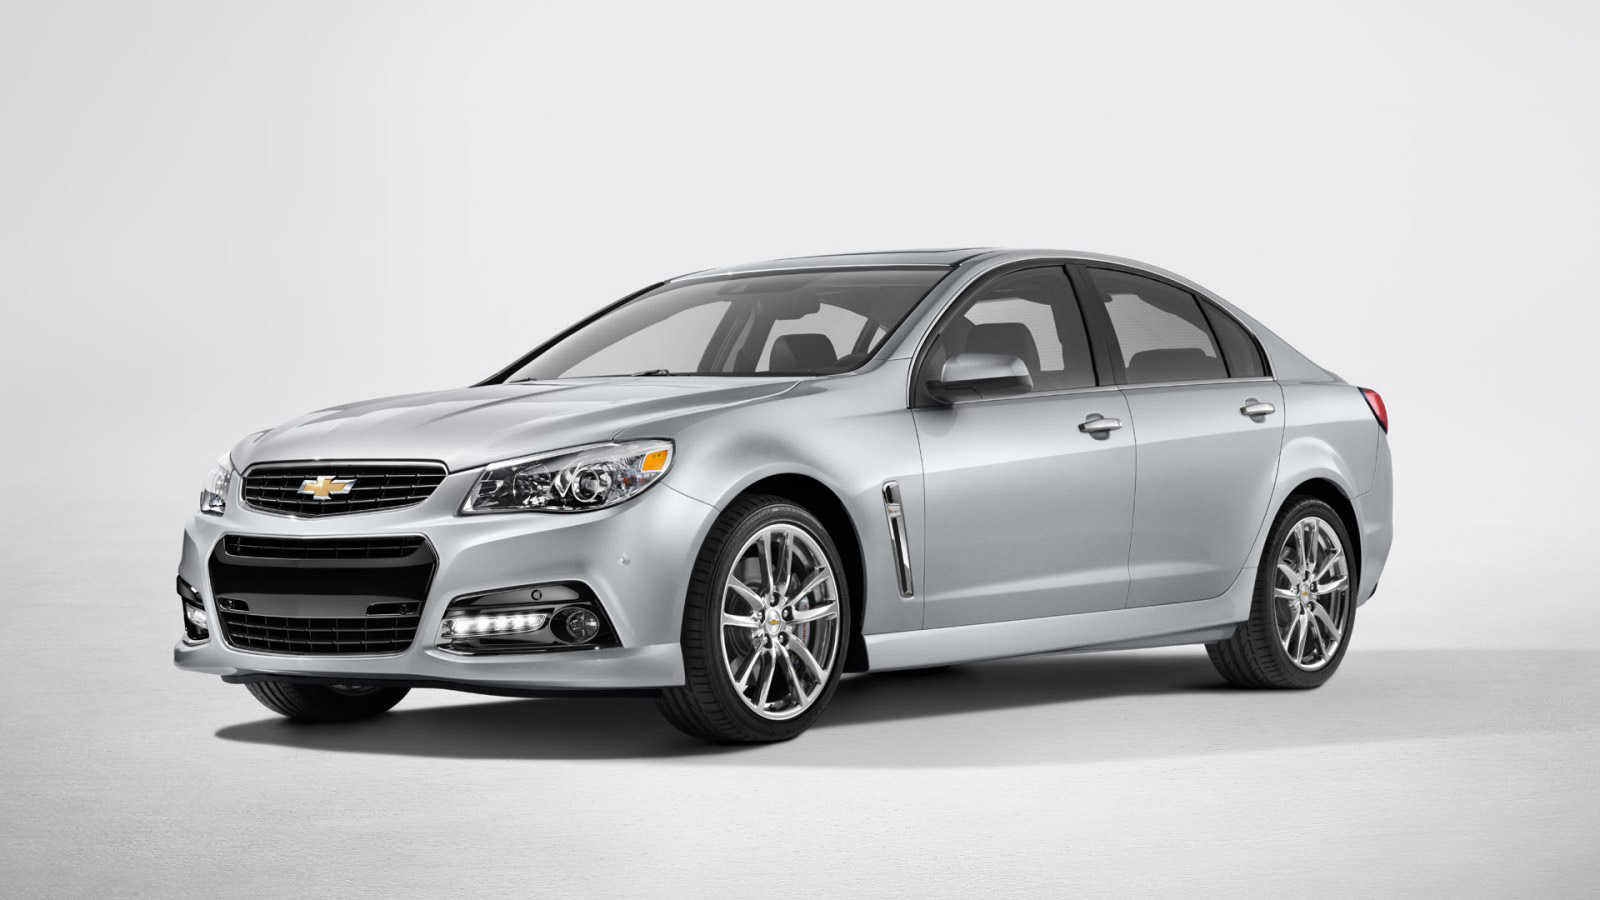 2014 Chevrolet SS (Chevy) Review, Ratings, Specs, Prices, and Photos